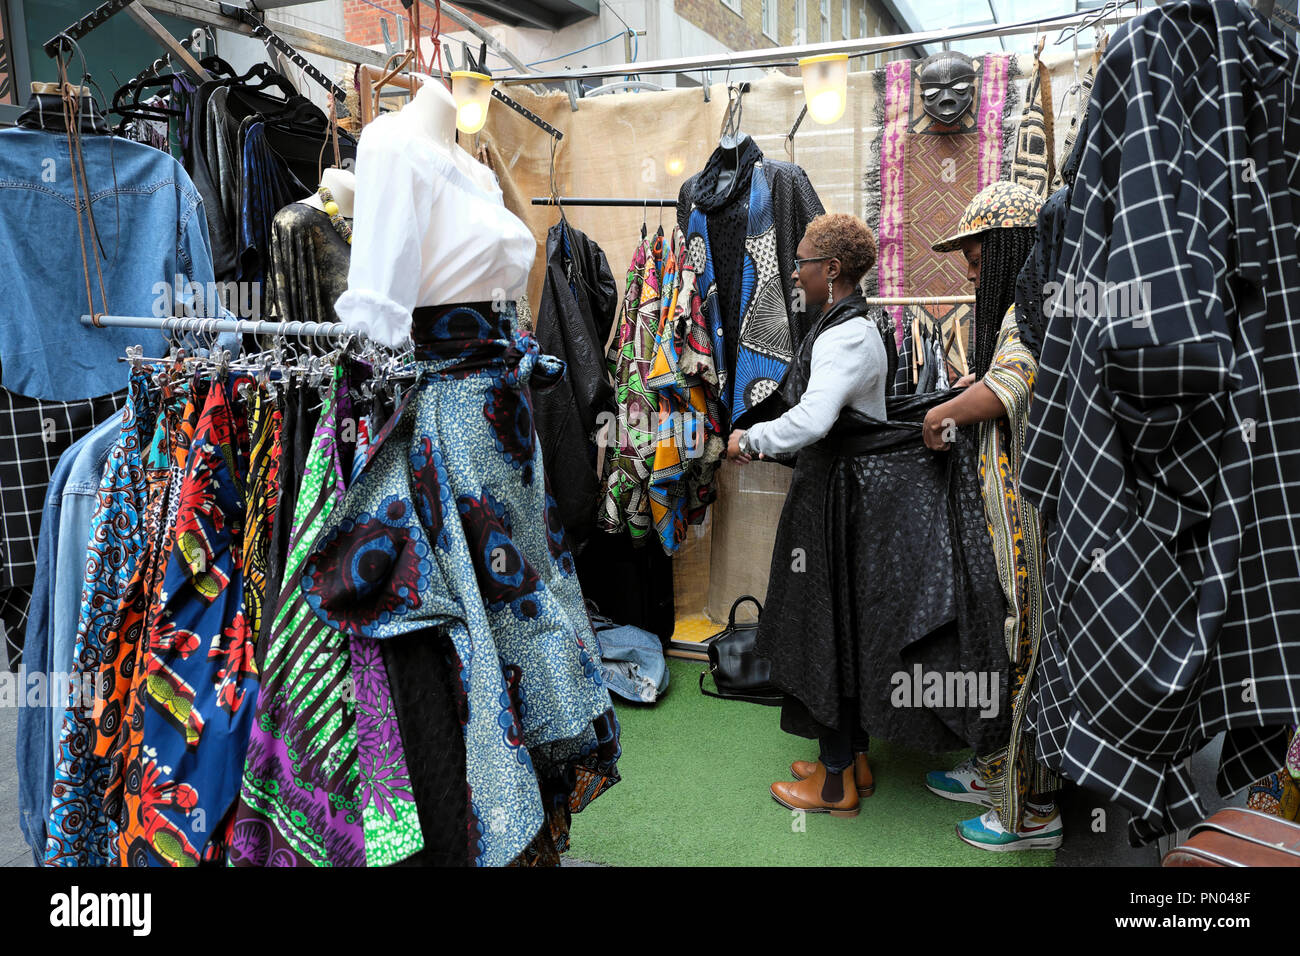 A woman trying on dress in clothing shop selling African textiles fabric clothing in Spitalfields Market in East London UK,  KATHY DEWITT Stock Photo